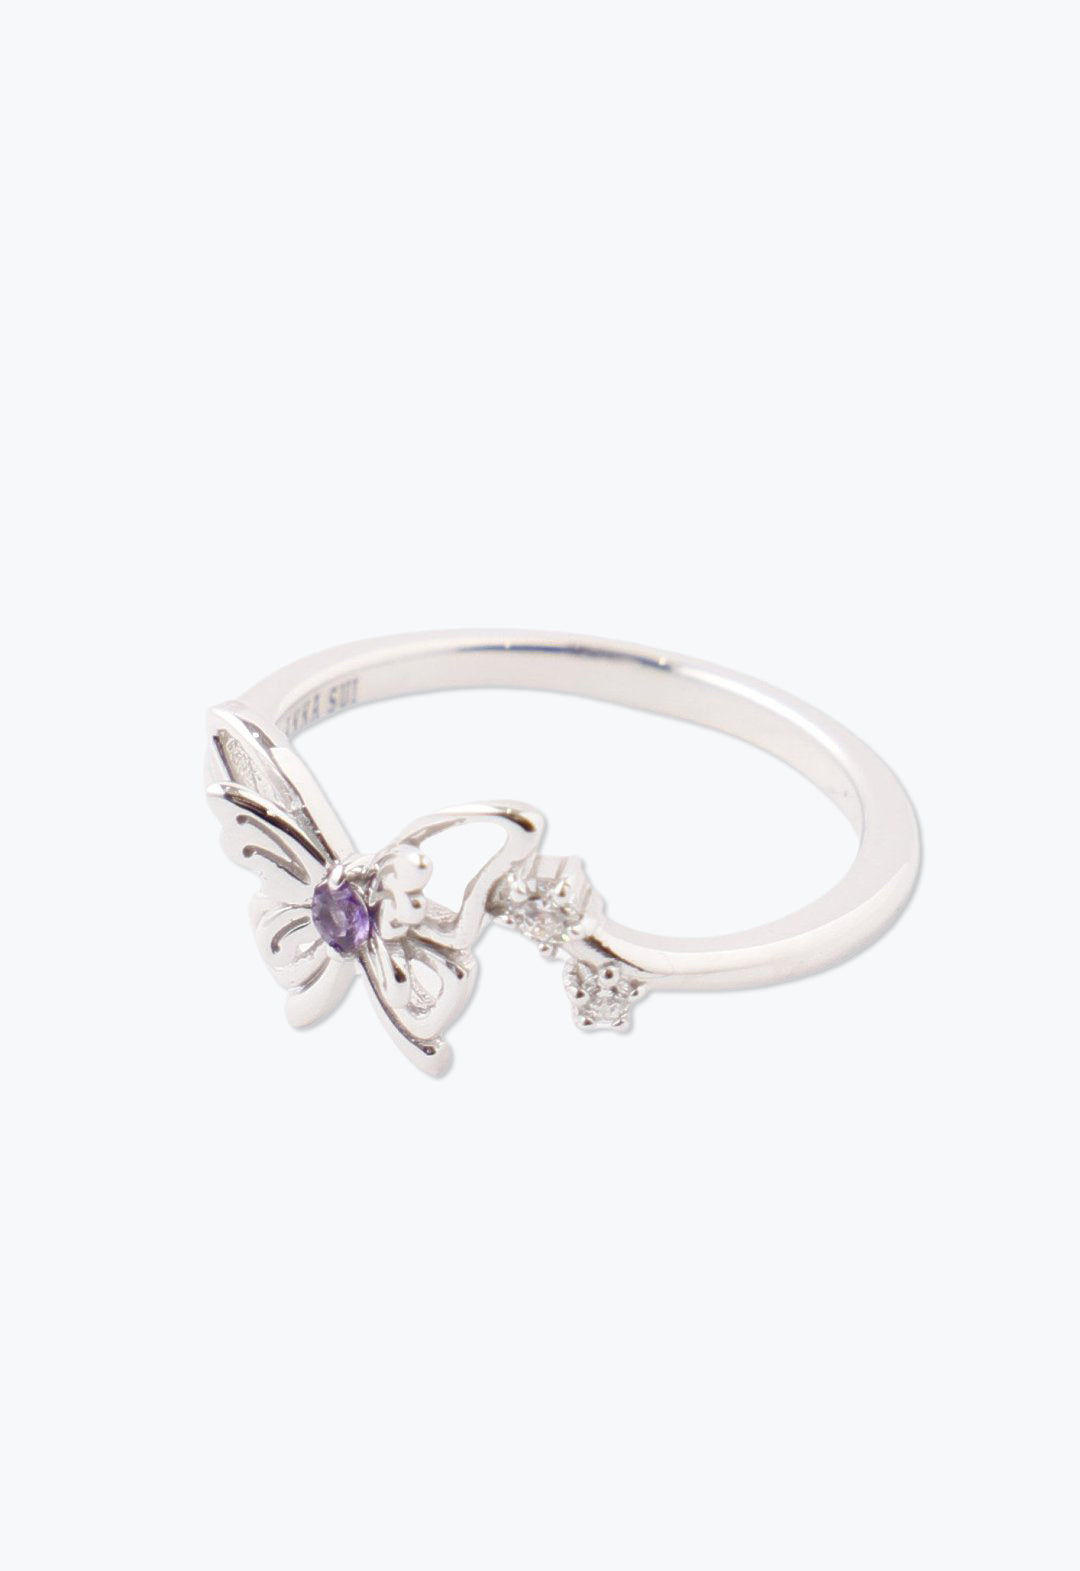 Ribbon Butterfly Ring Silver, Rhodium Plated metal, an Amethyst and 2 Cubic Zirconia